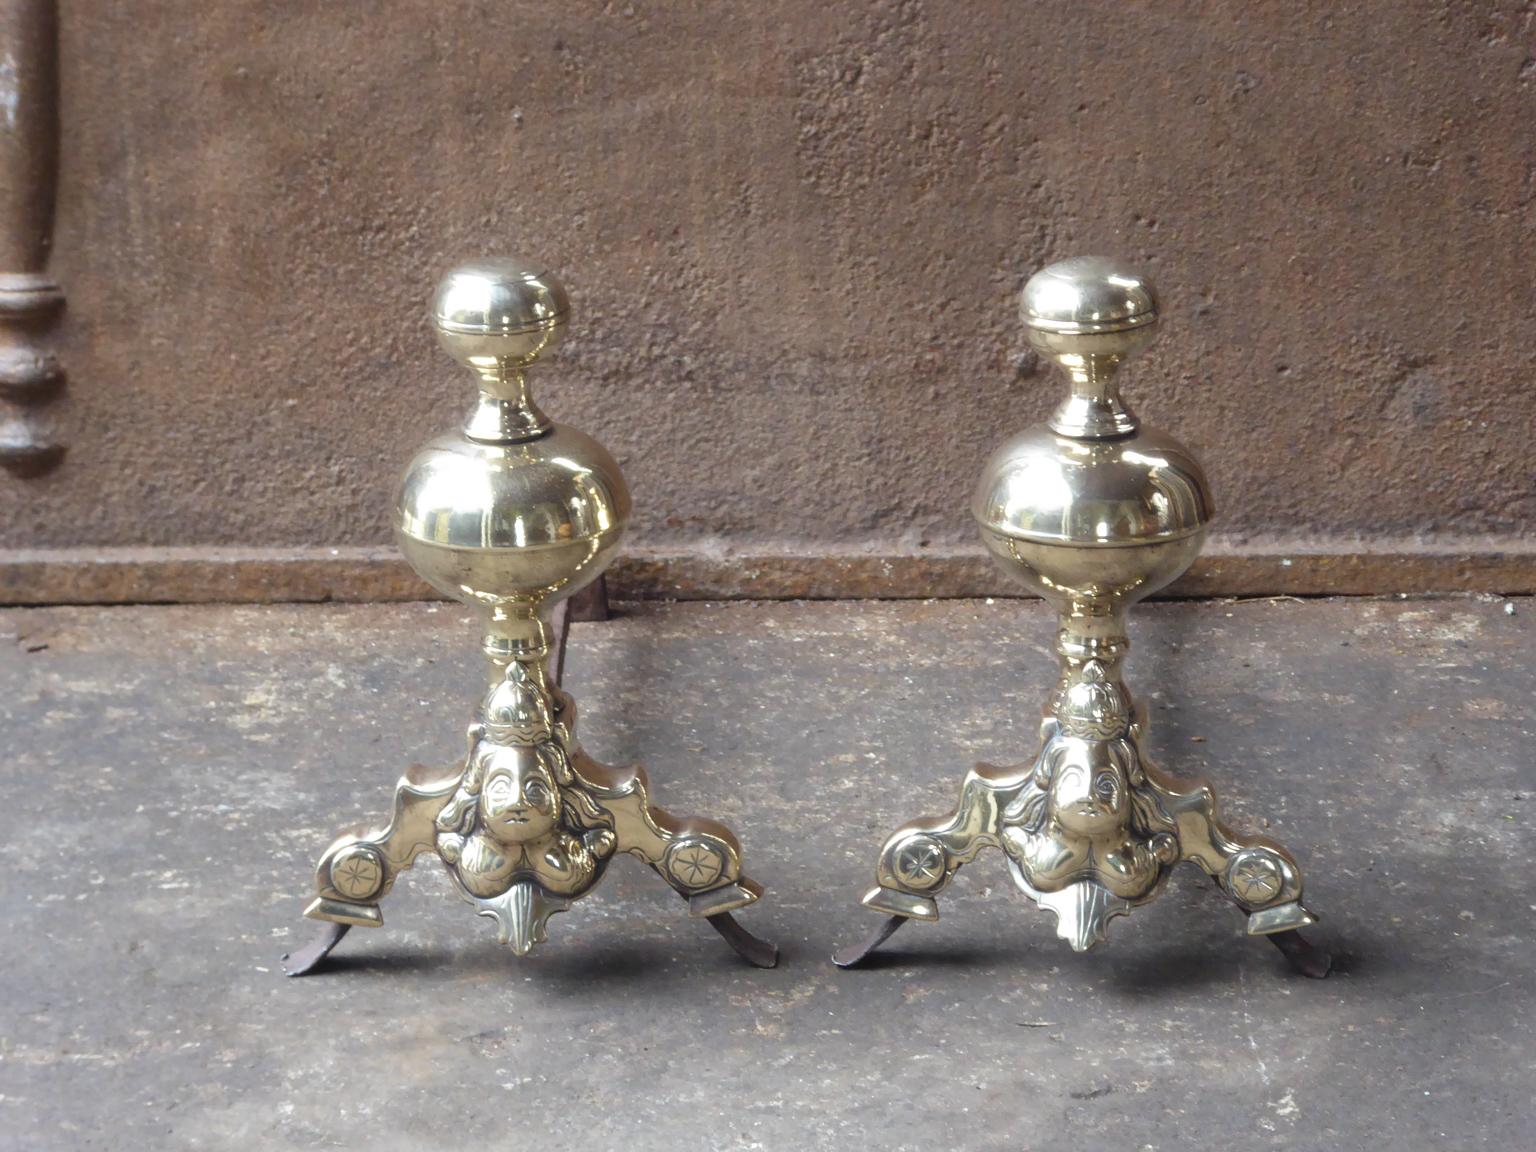 Beautiful 17th century French Louis XIV andirons. The andirons are made of polished bronze and wrought iron. They have the typical Louis XIV design which was popular during that period.















 